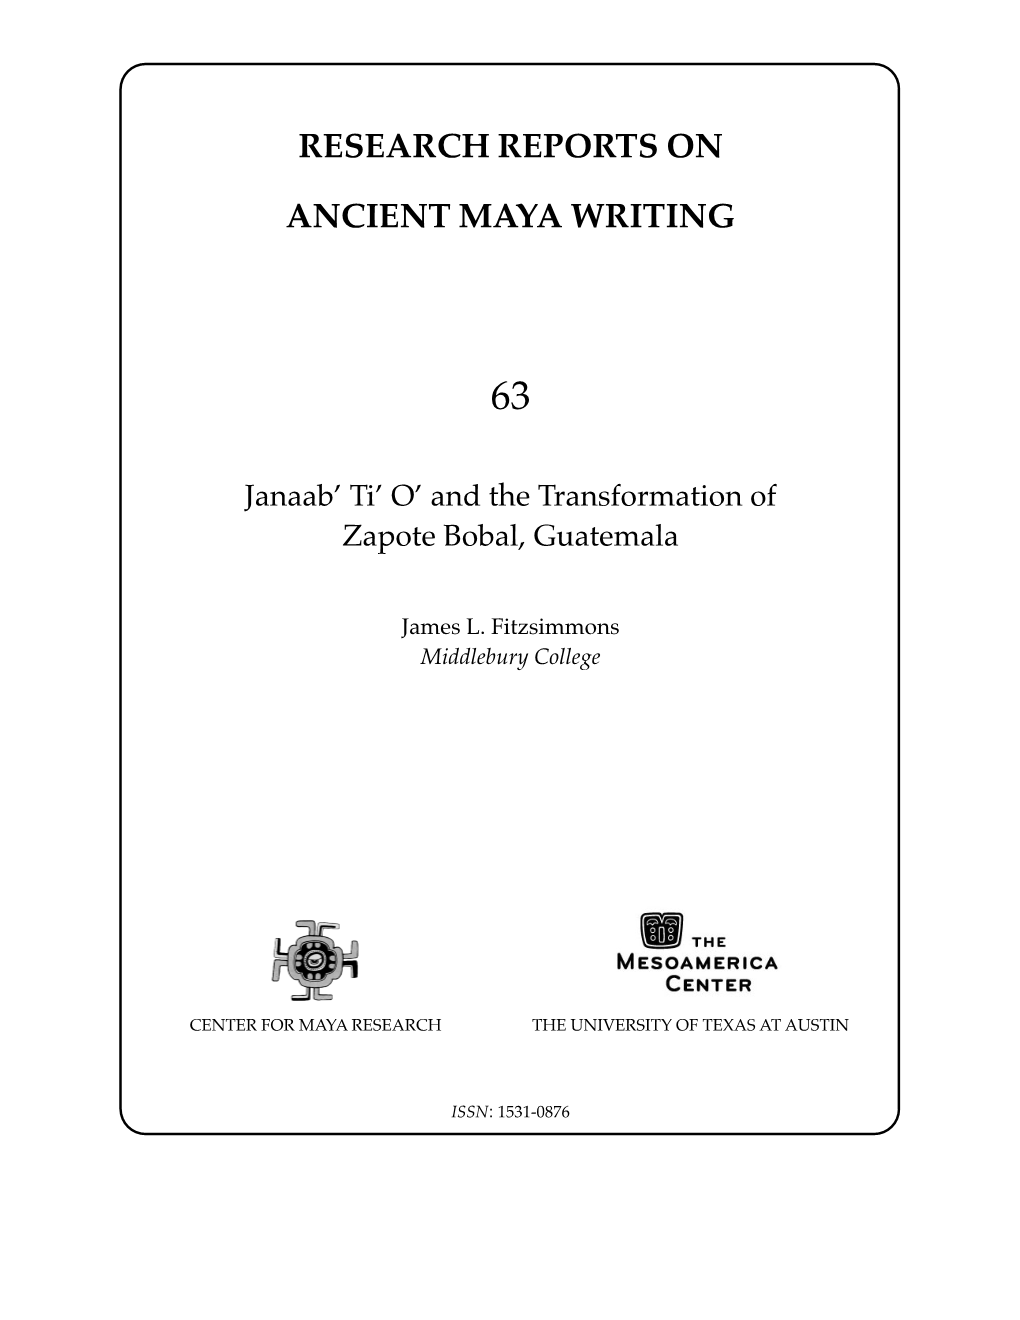 Research Reports on Ancient Maya Writing